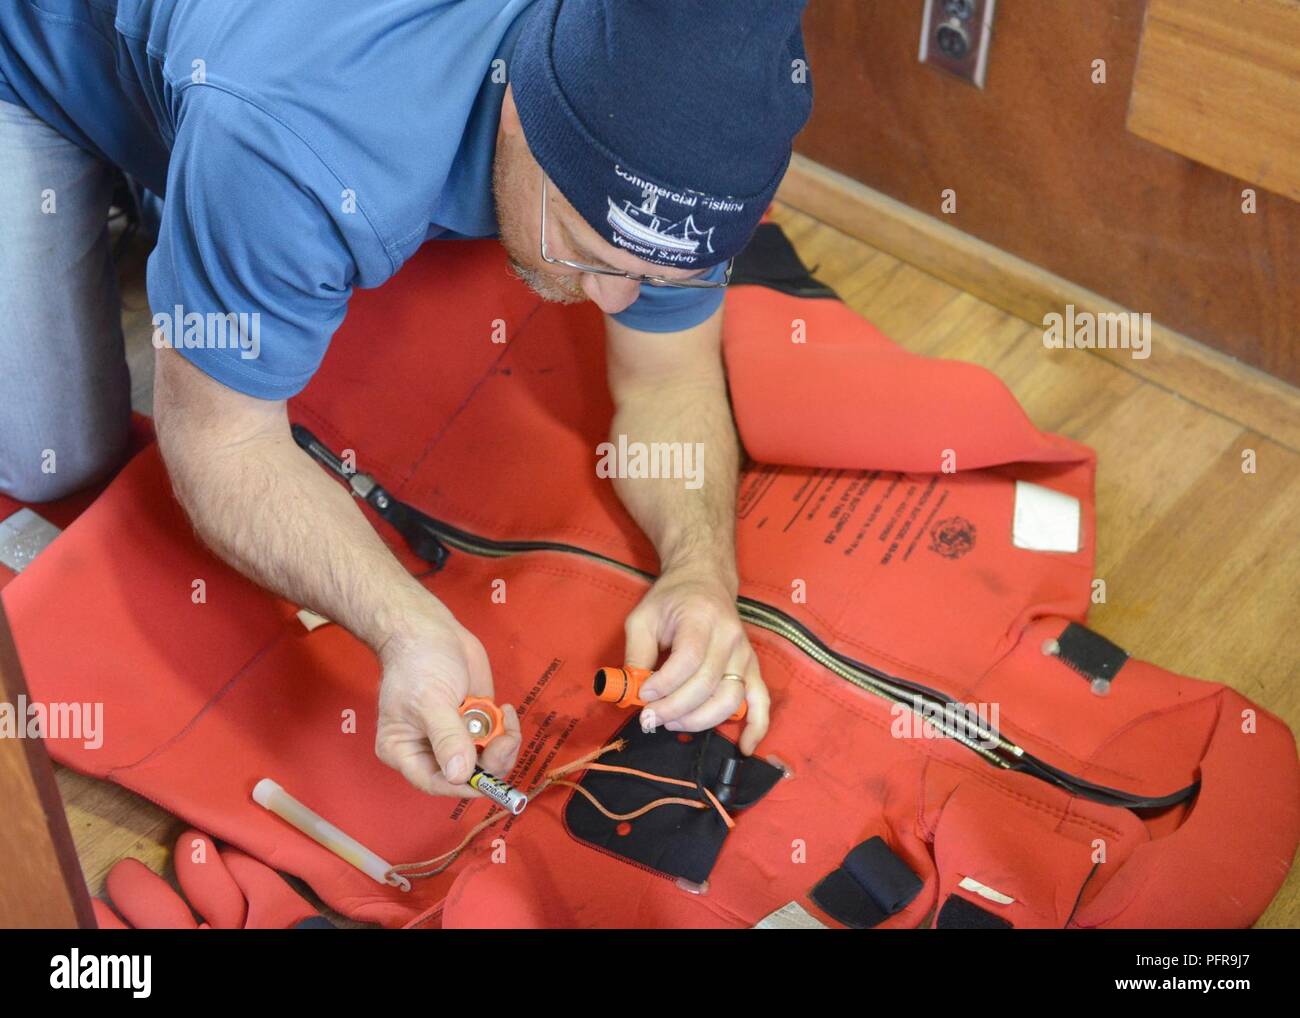 Dennis Schoenwether, a Coast Guard commercial fishing vessel safety examiner, carefully inspects an immersion suit aboard a fishing vessel in Kodiak, Alaska, May 23, 2018. Immersion suits are a mandatory item on commercial fishing vessels as they can provide some protection from frigid Alaskan waters. U.S. Coast Guard Stock Photo